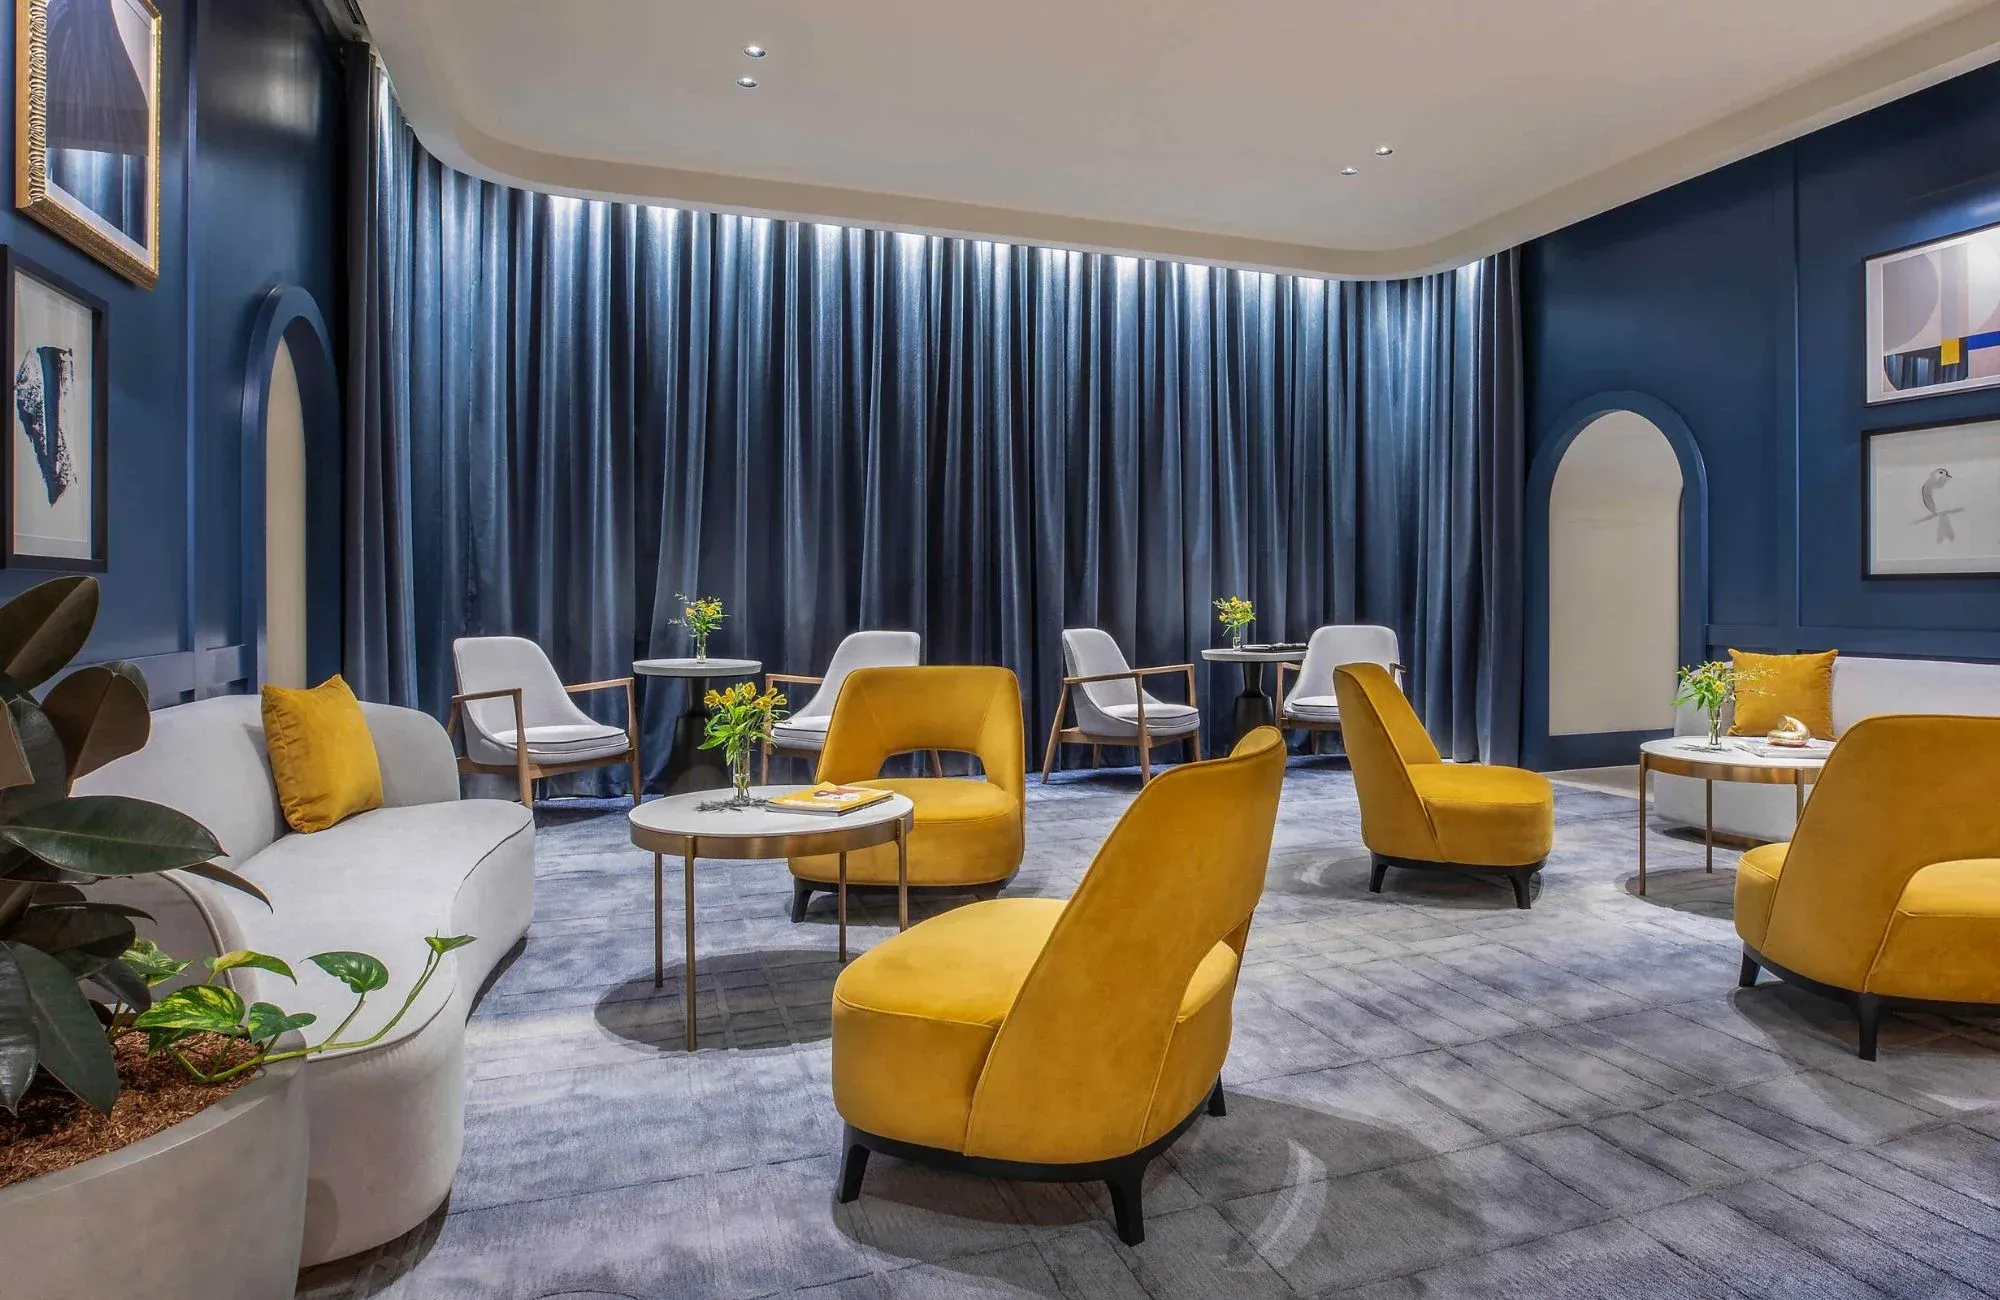 Voco Melbourne Central by IHG Hotels & Resorts. Lobby Seating area